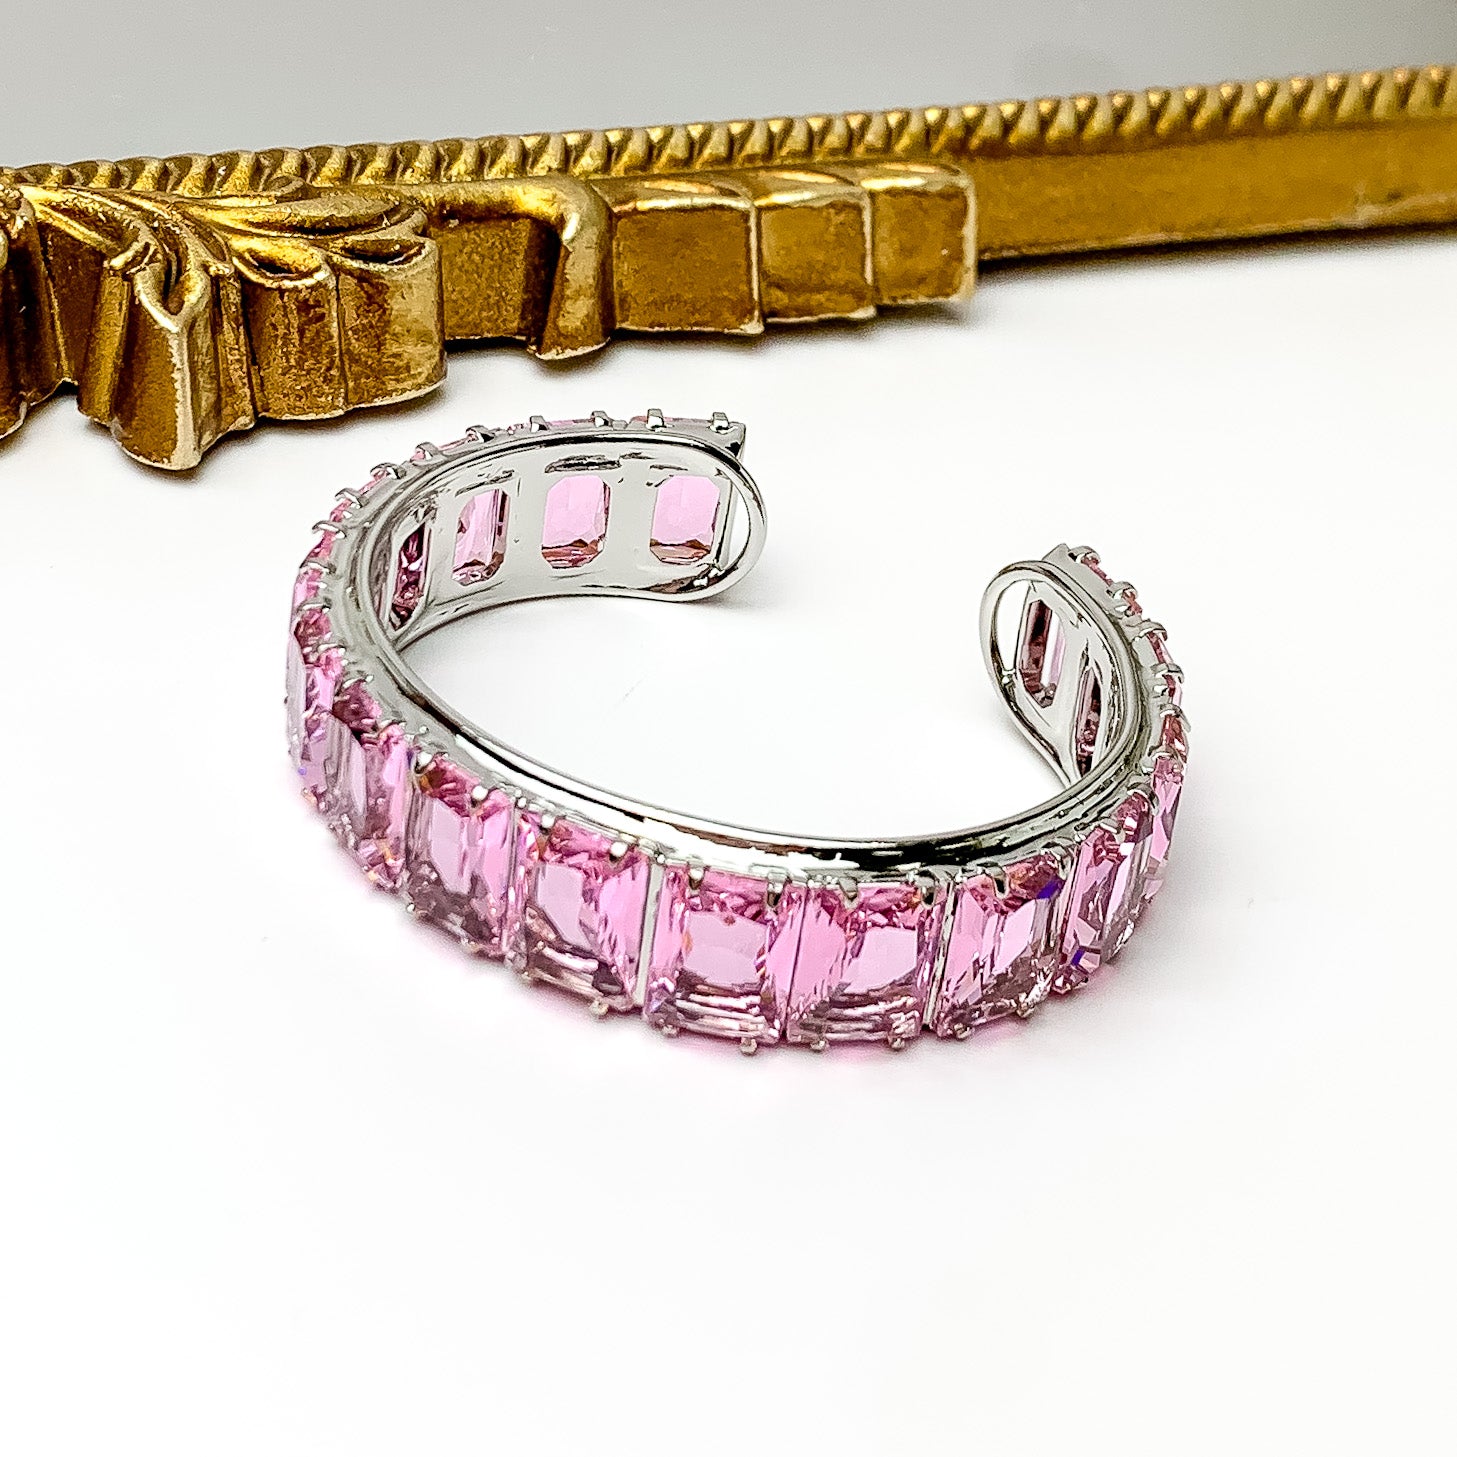 Silver bangle with a pink, rectangle crystal inlay. This bracelet is pictured on a white background with a gold mirror at the top of the picture.  